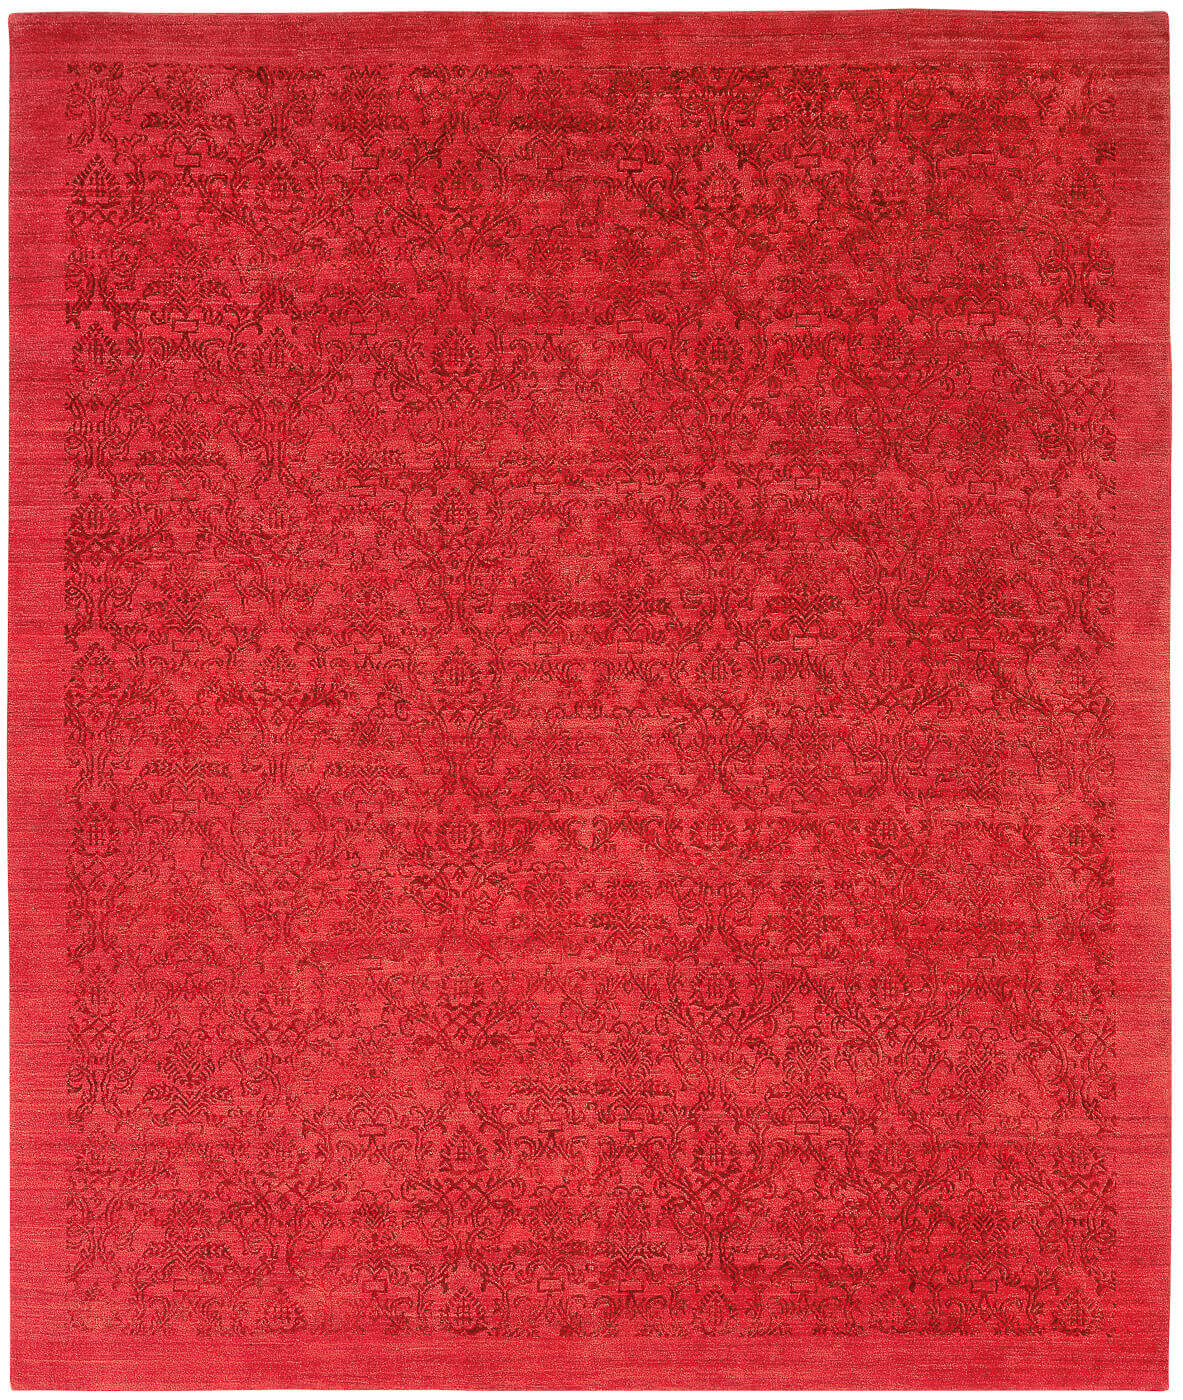 Roma Red Luxury Hand-woven Rug